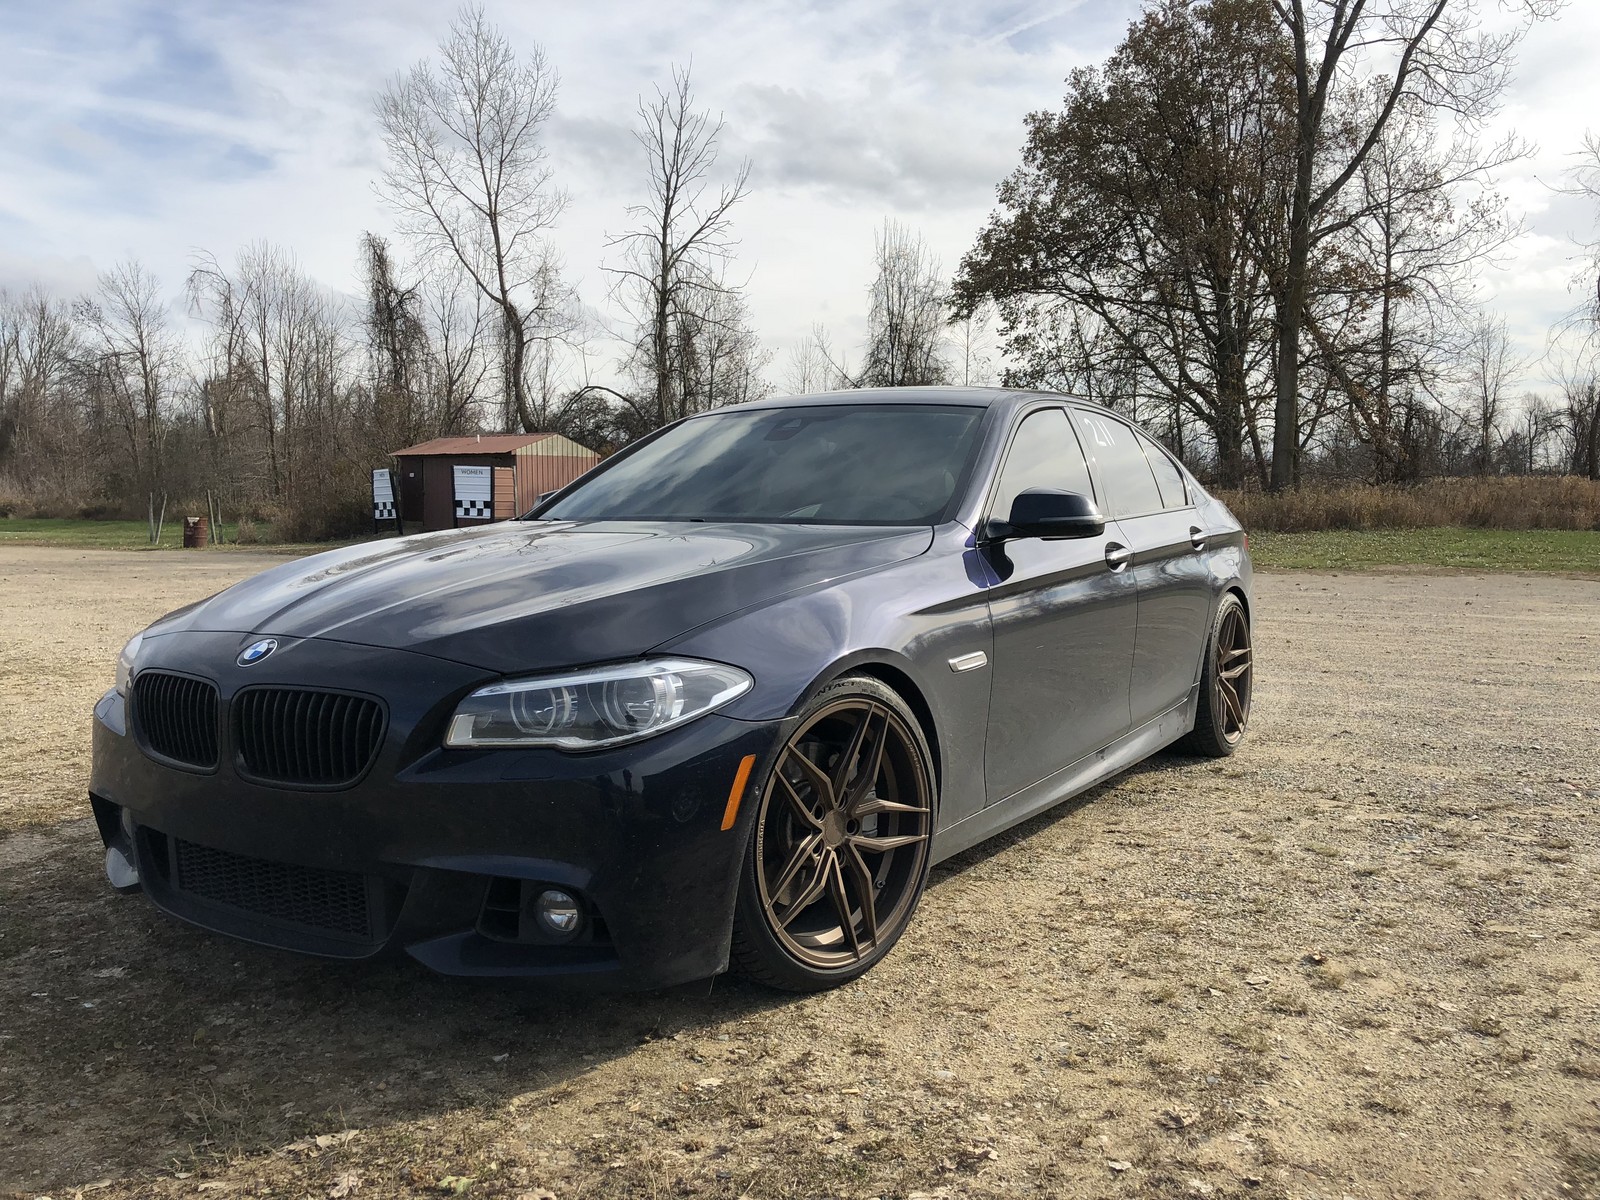 2014 Imperial blue metallic BMW 550i XDrive picture, mods, upgrades